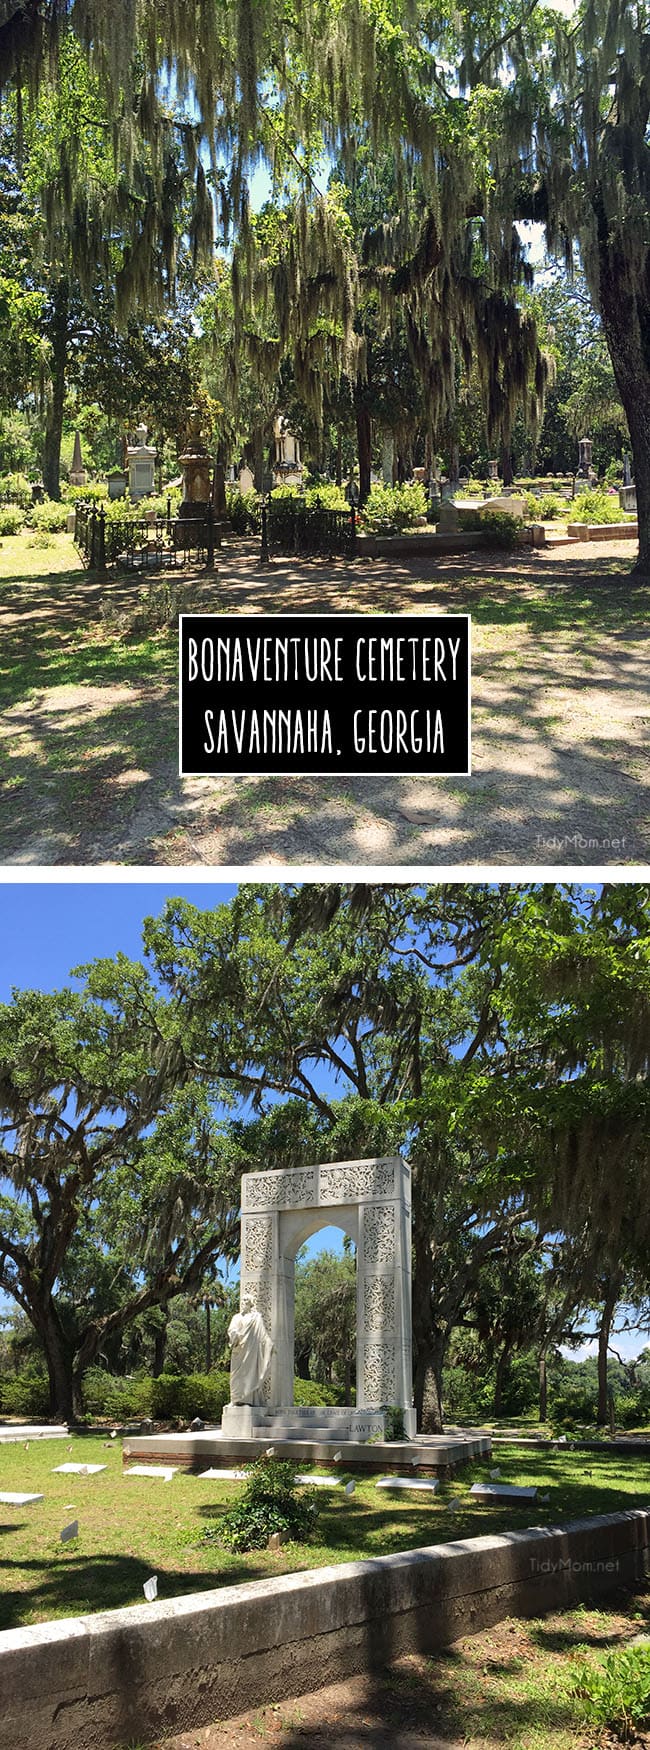 Hauntingly beautiful Bonaventure Cemetery Savannah, Georgia Featured on the cover of Midnight in the Garden of Good and Evil. More Savannah Sightseeing at TidyMom.net